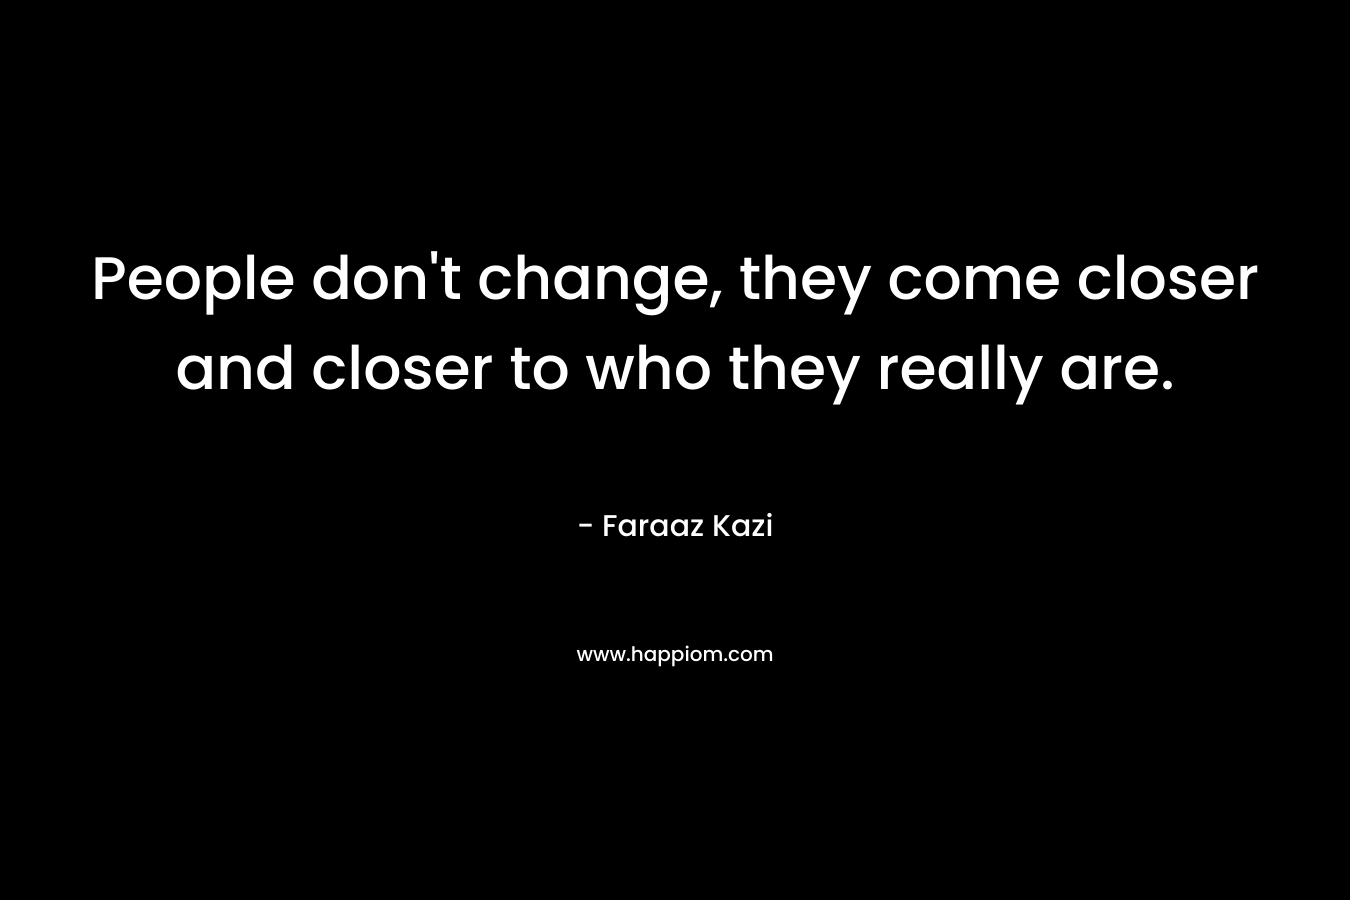 People don’t change, they come closer and closer to who they really are. – Faraaz Kazi